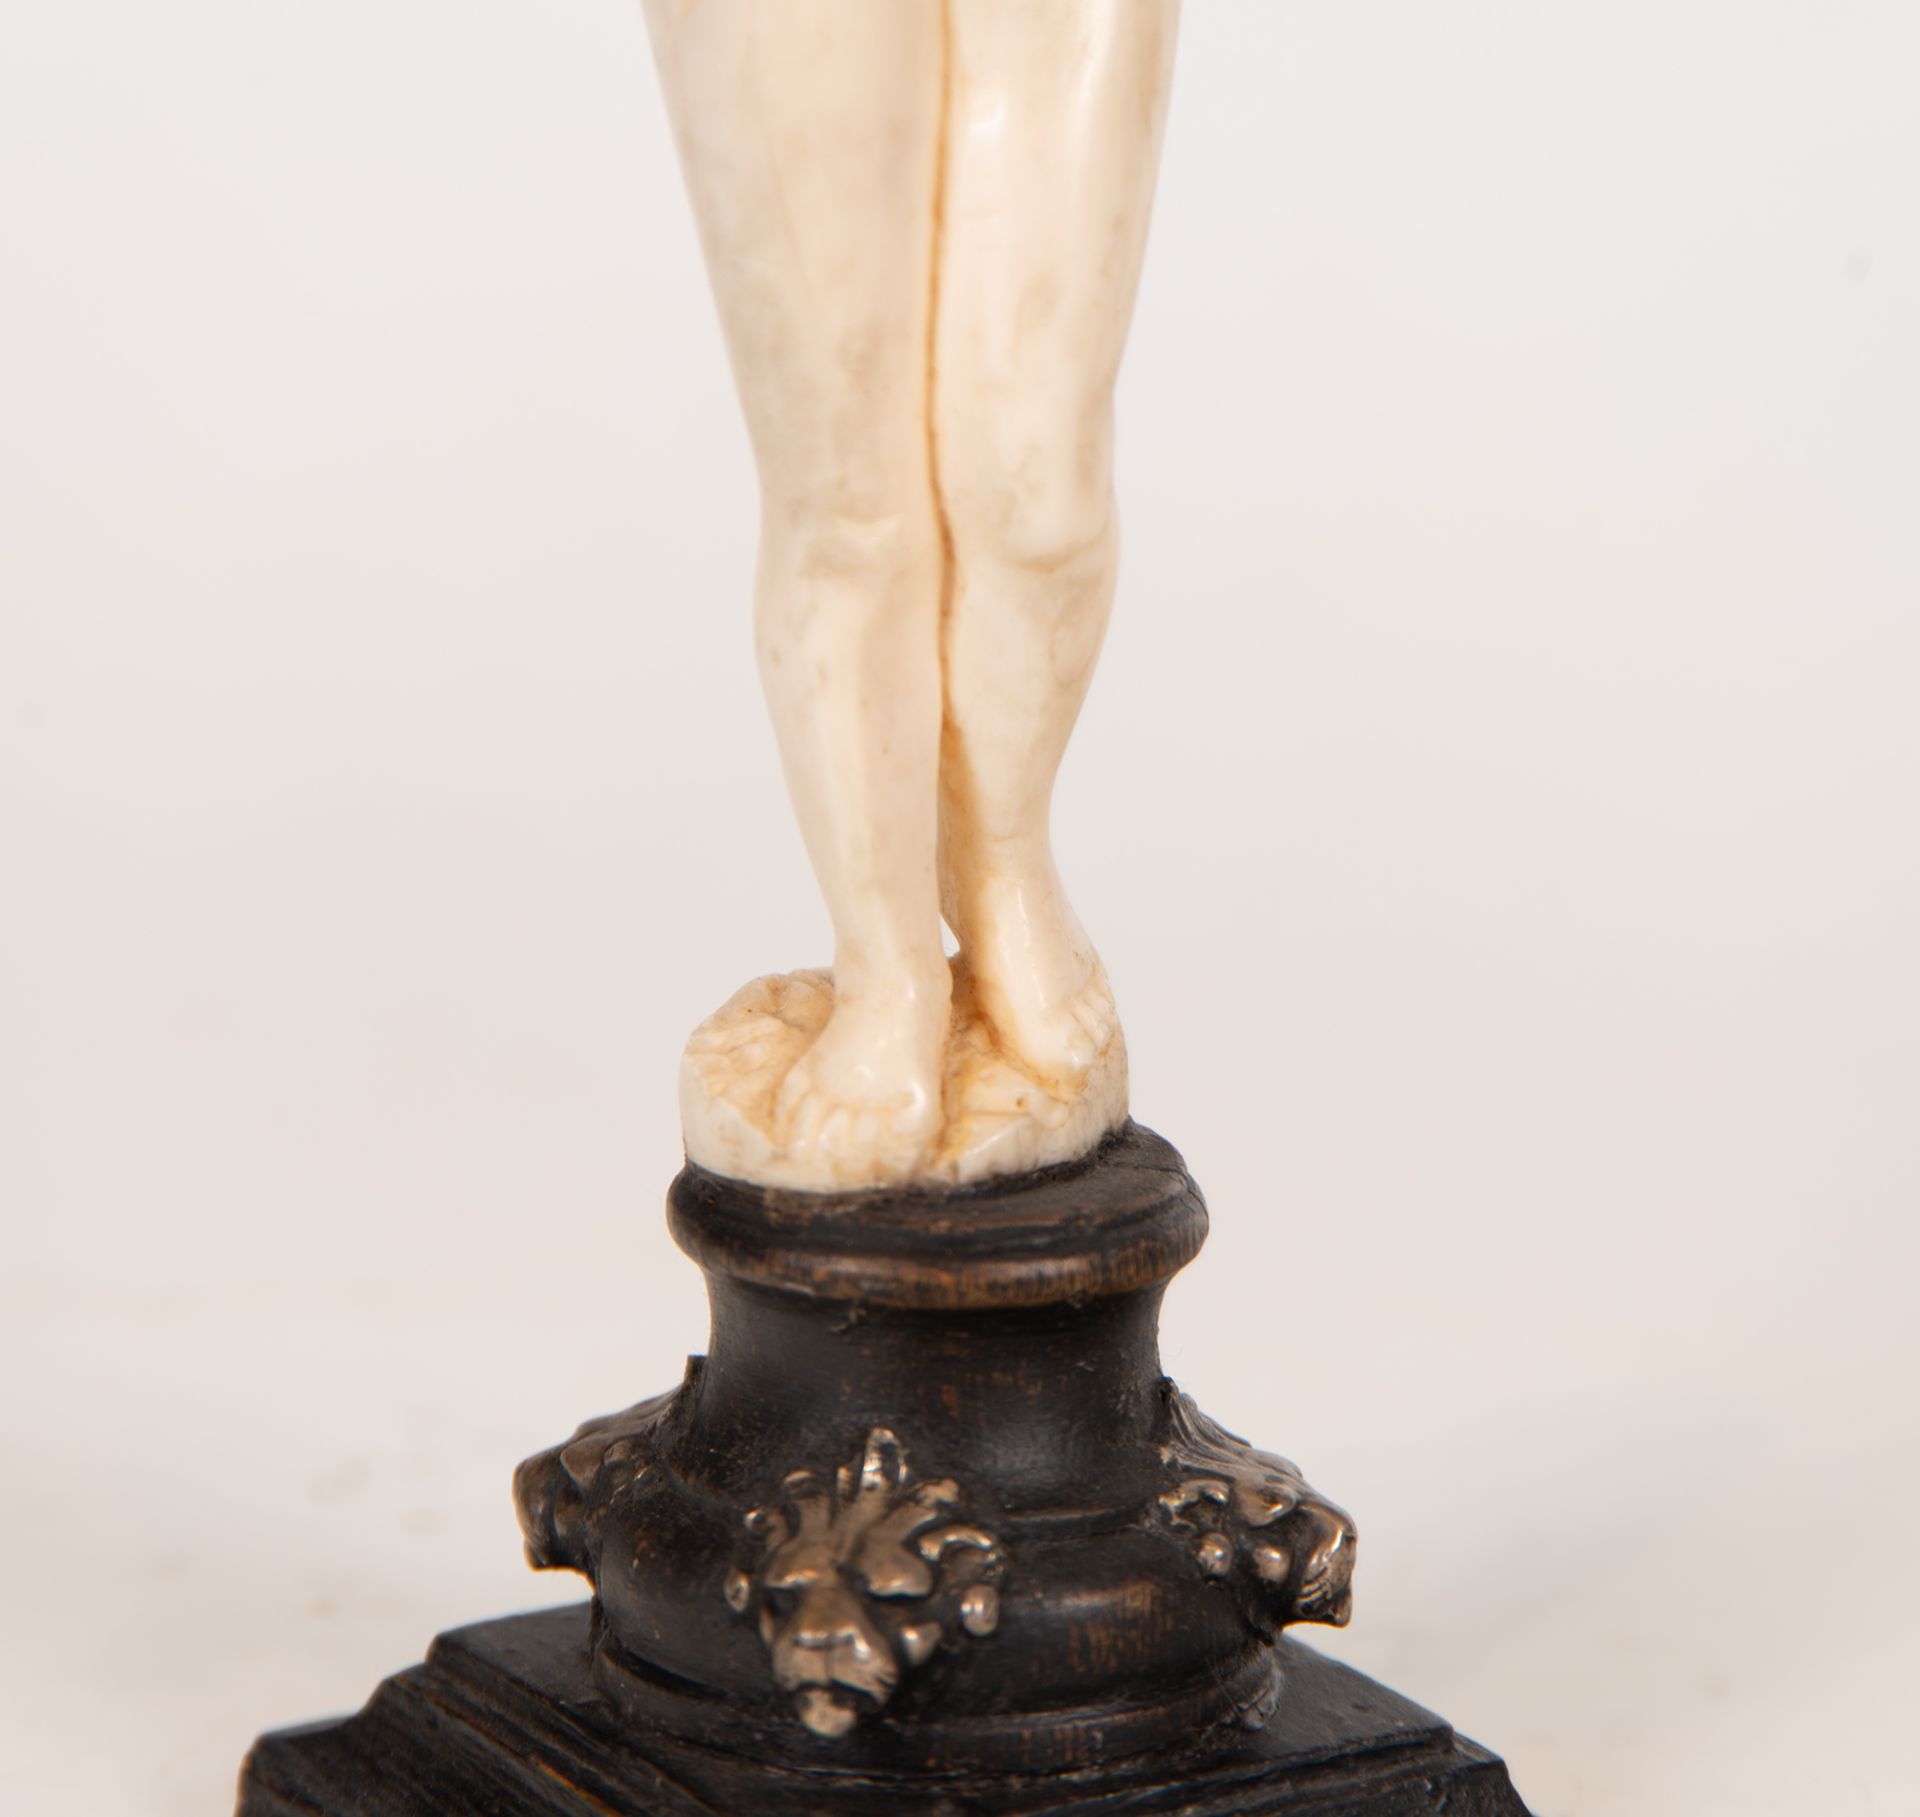 Aphrodite in Ivory, 17th century Flemish work - Image 8 of 9